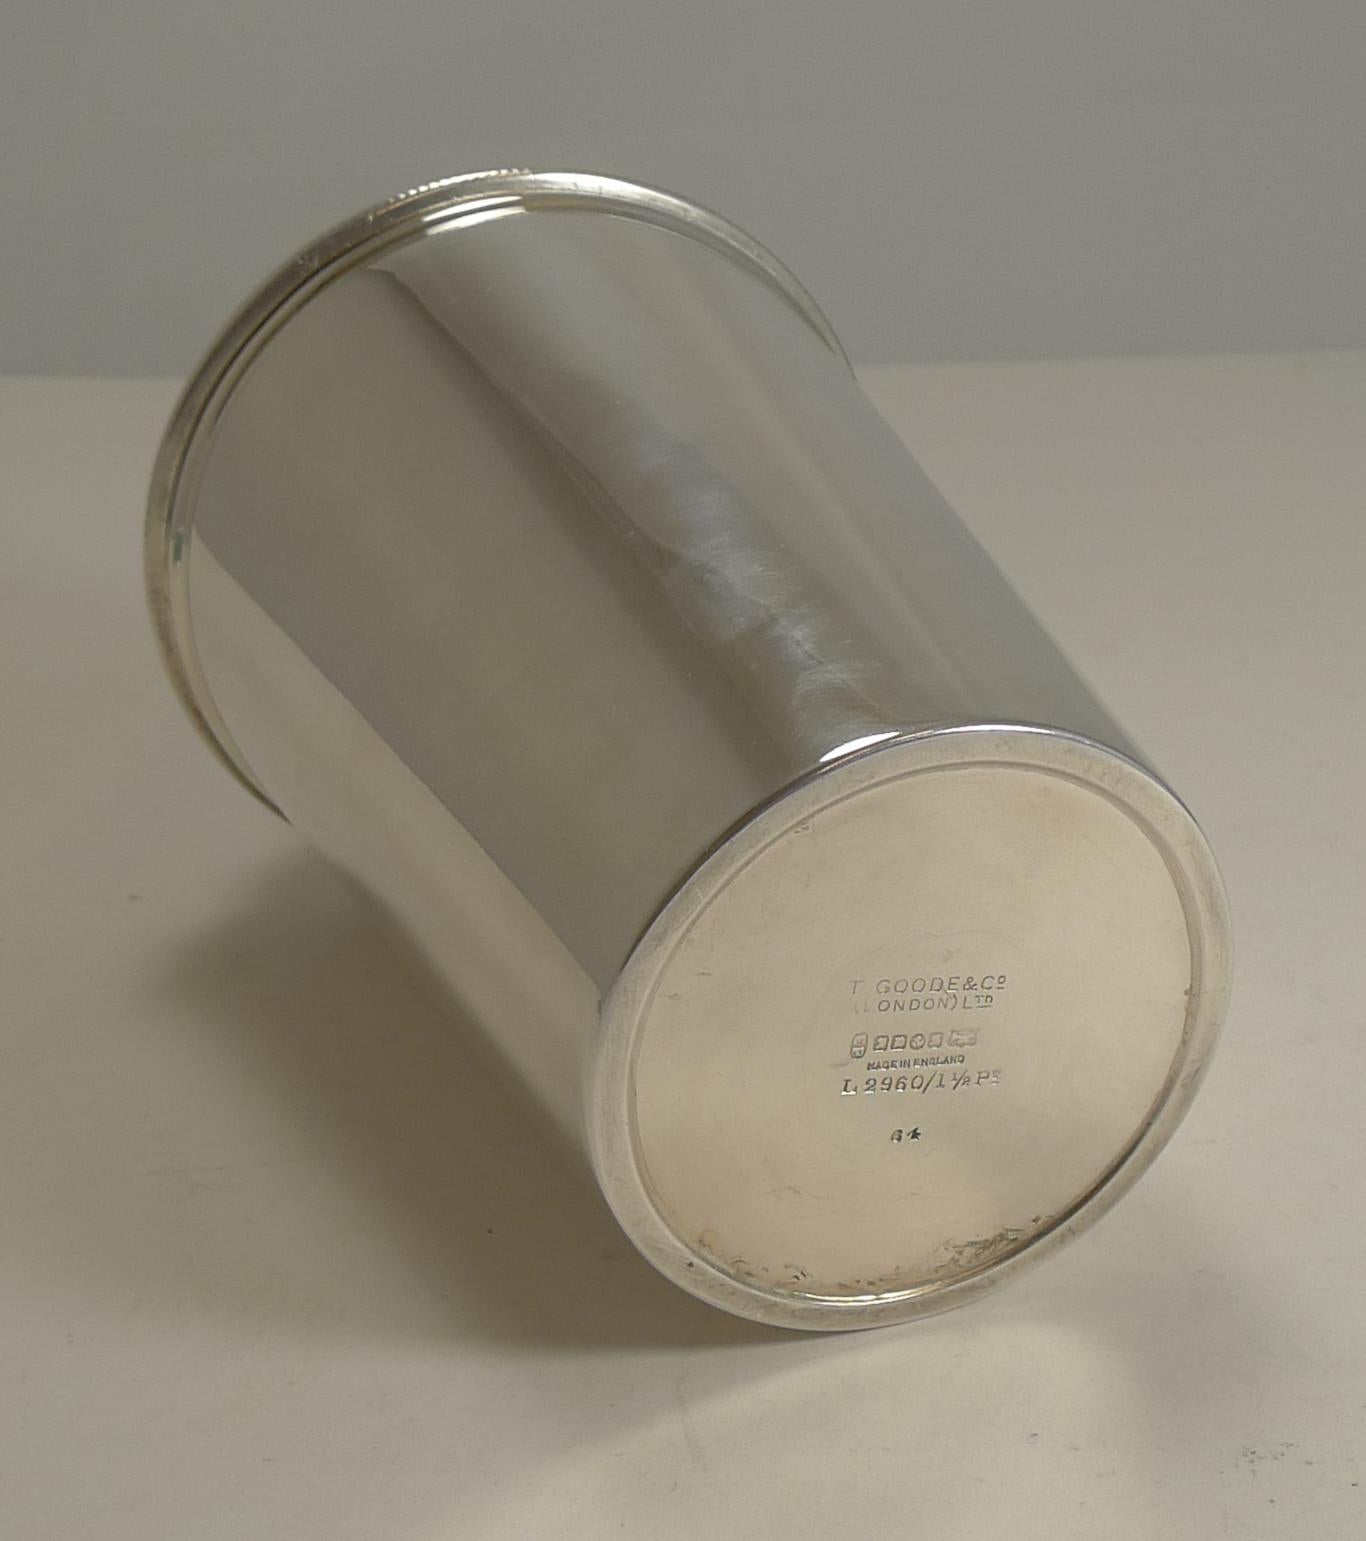 Smart Large Art Deco Cocktail Shaker Retailed by Thomas Goode, London 4